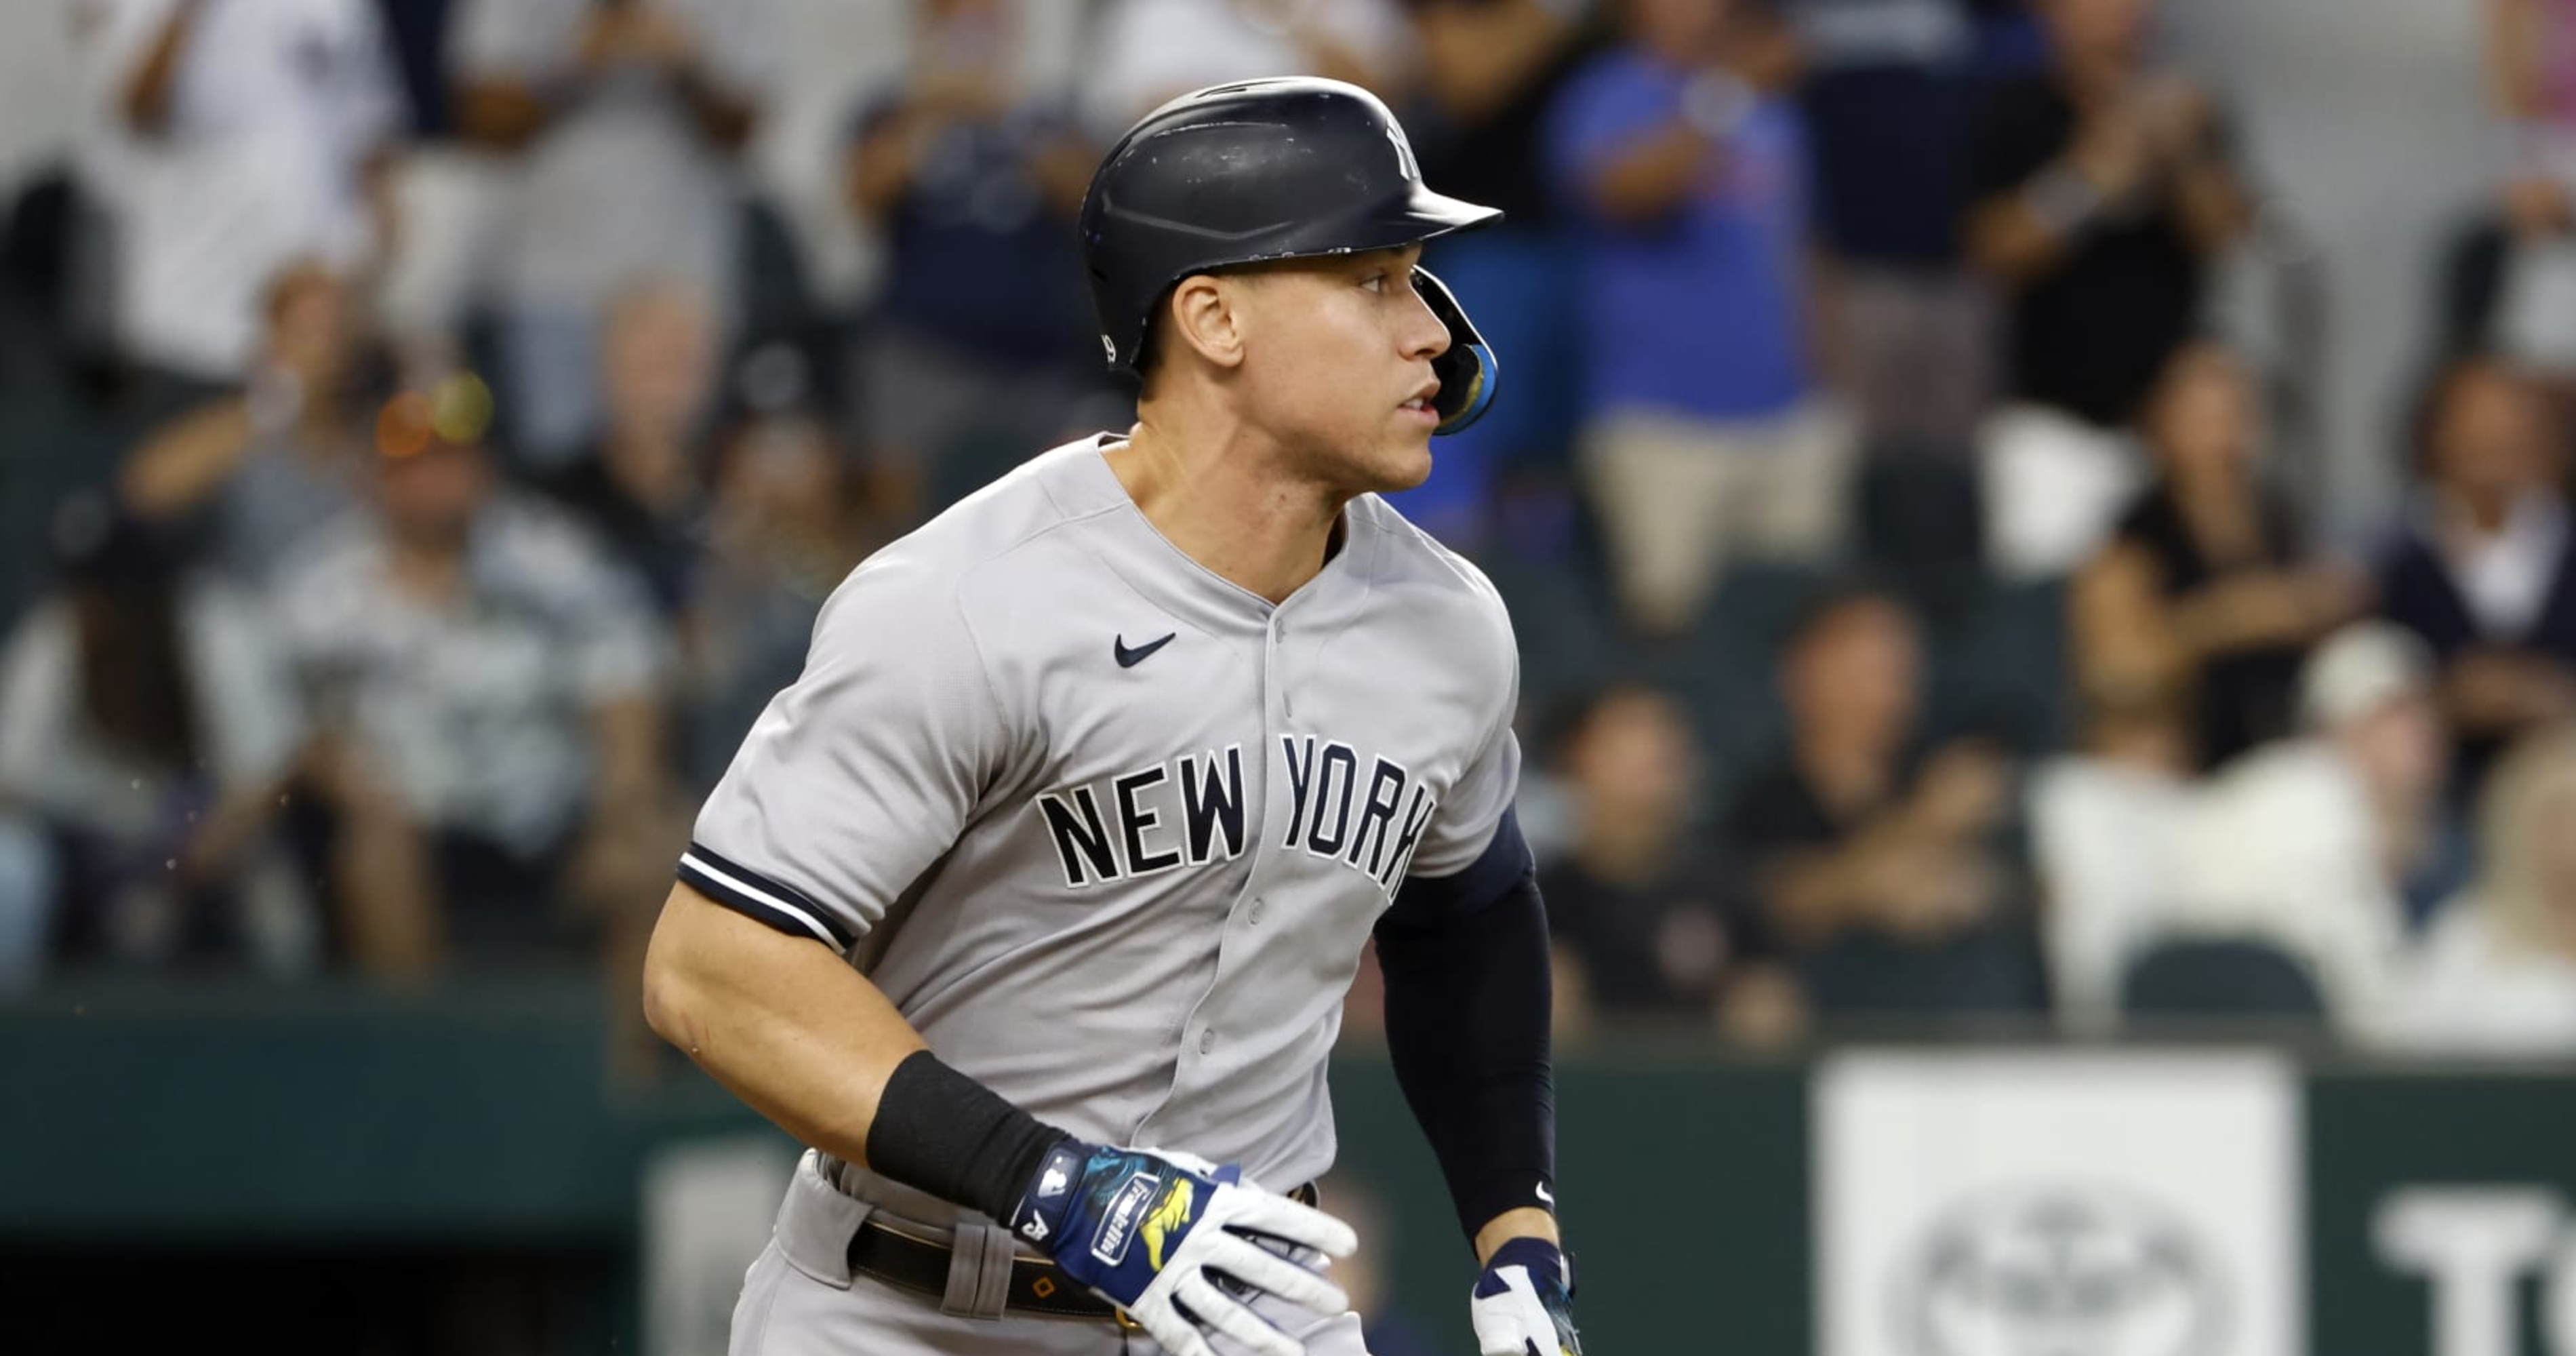 Aaron Judge home run record: Fan leaps out of stands for historic